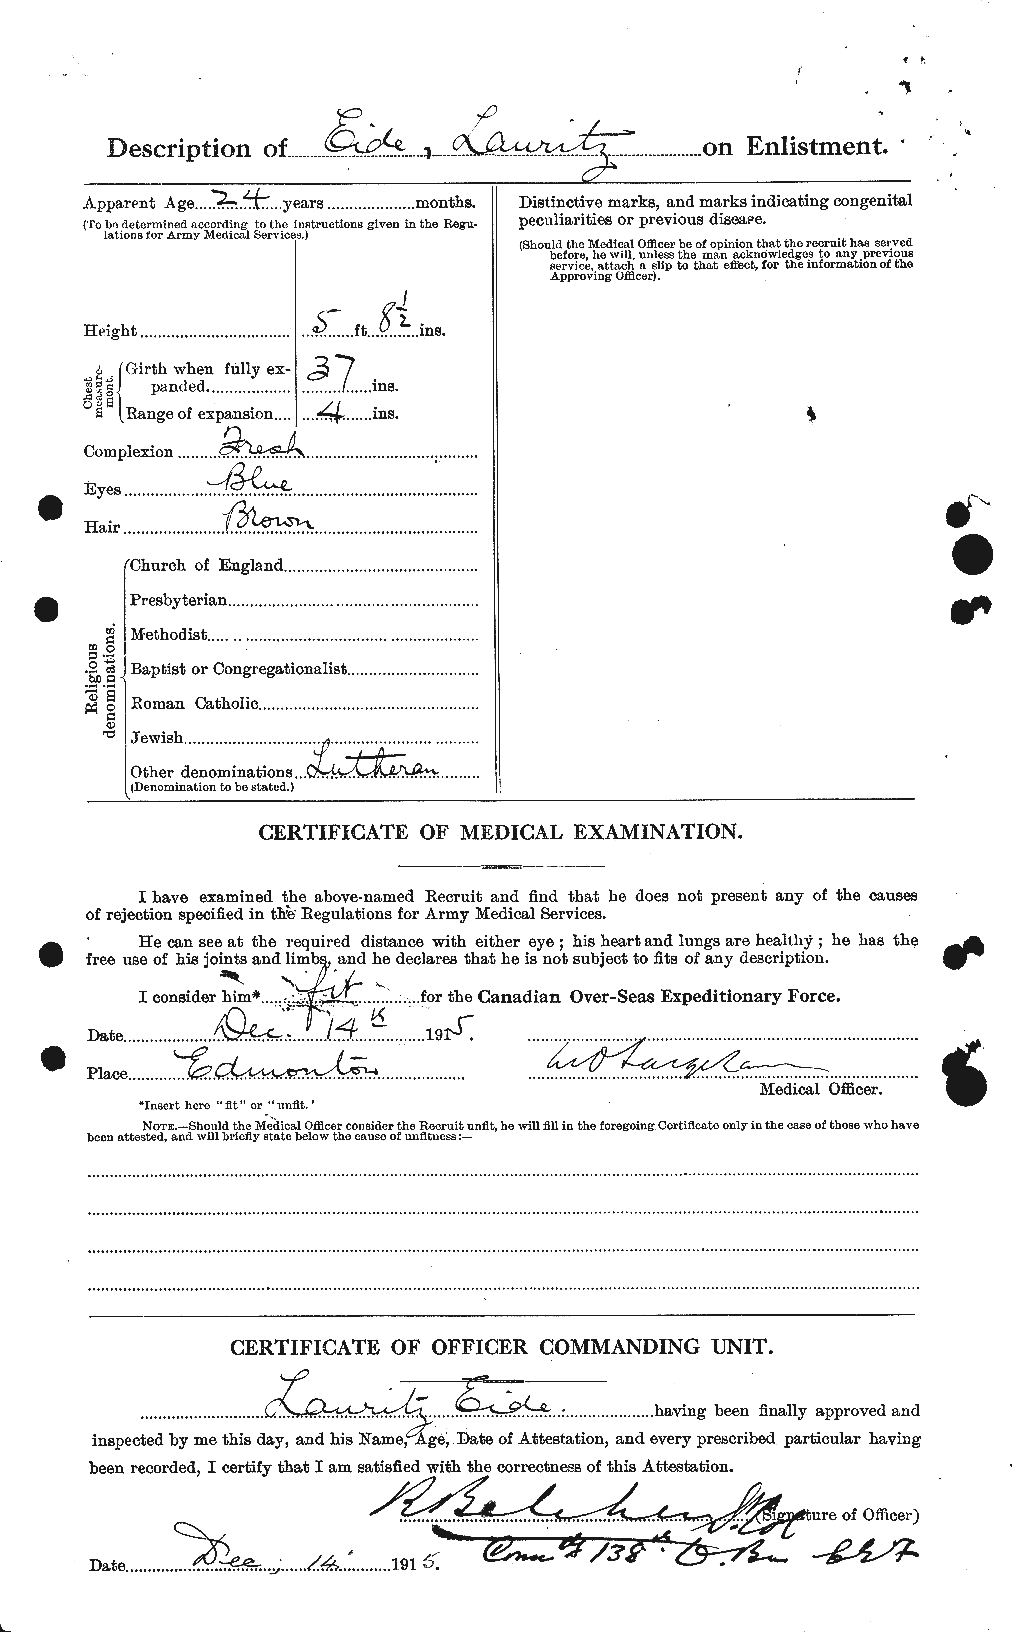 Personnel Records of the First World War - CEF 310022b